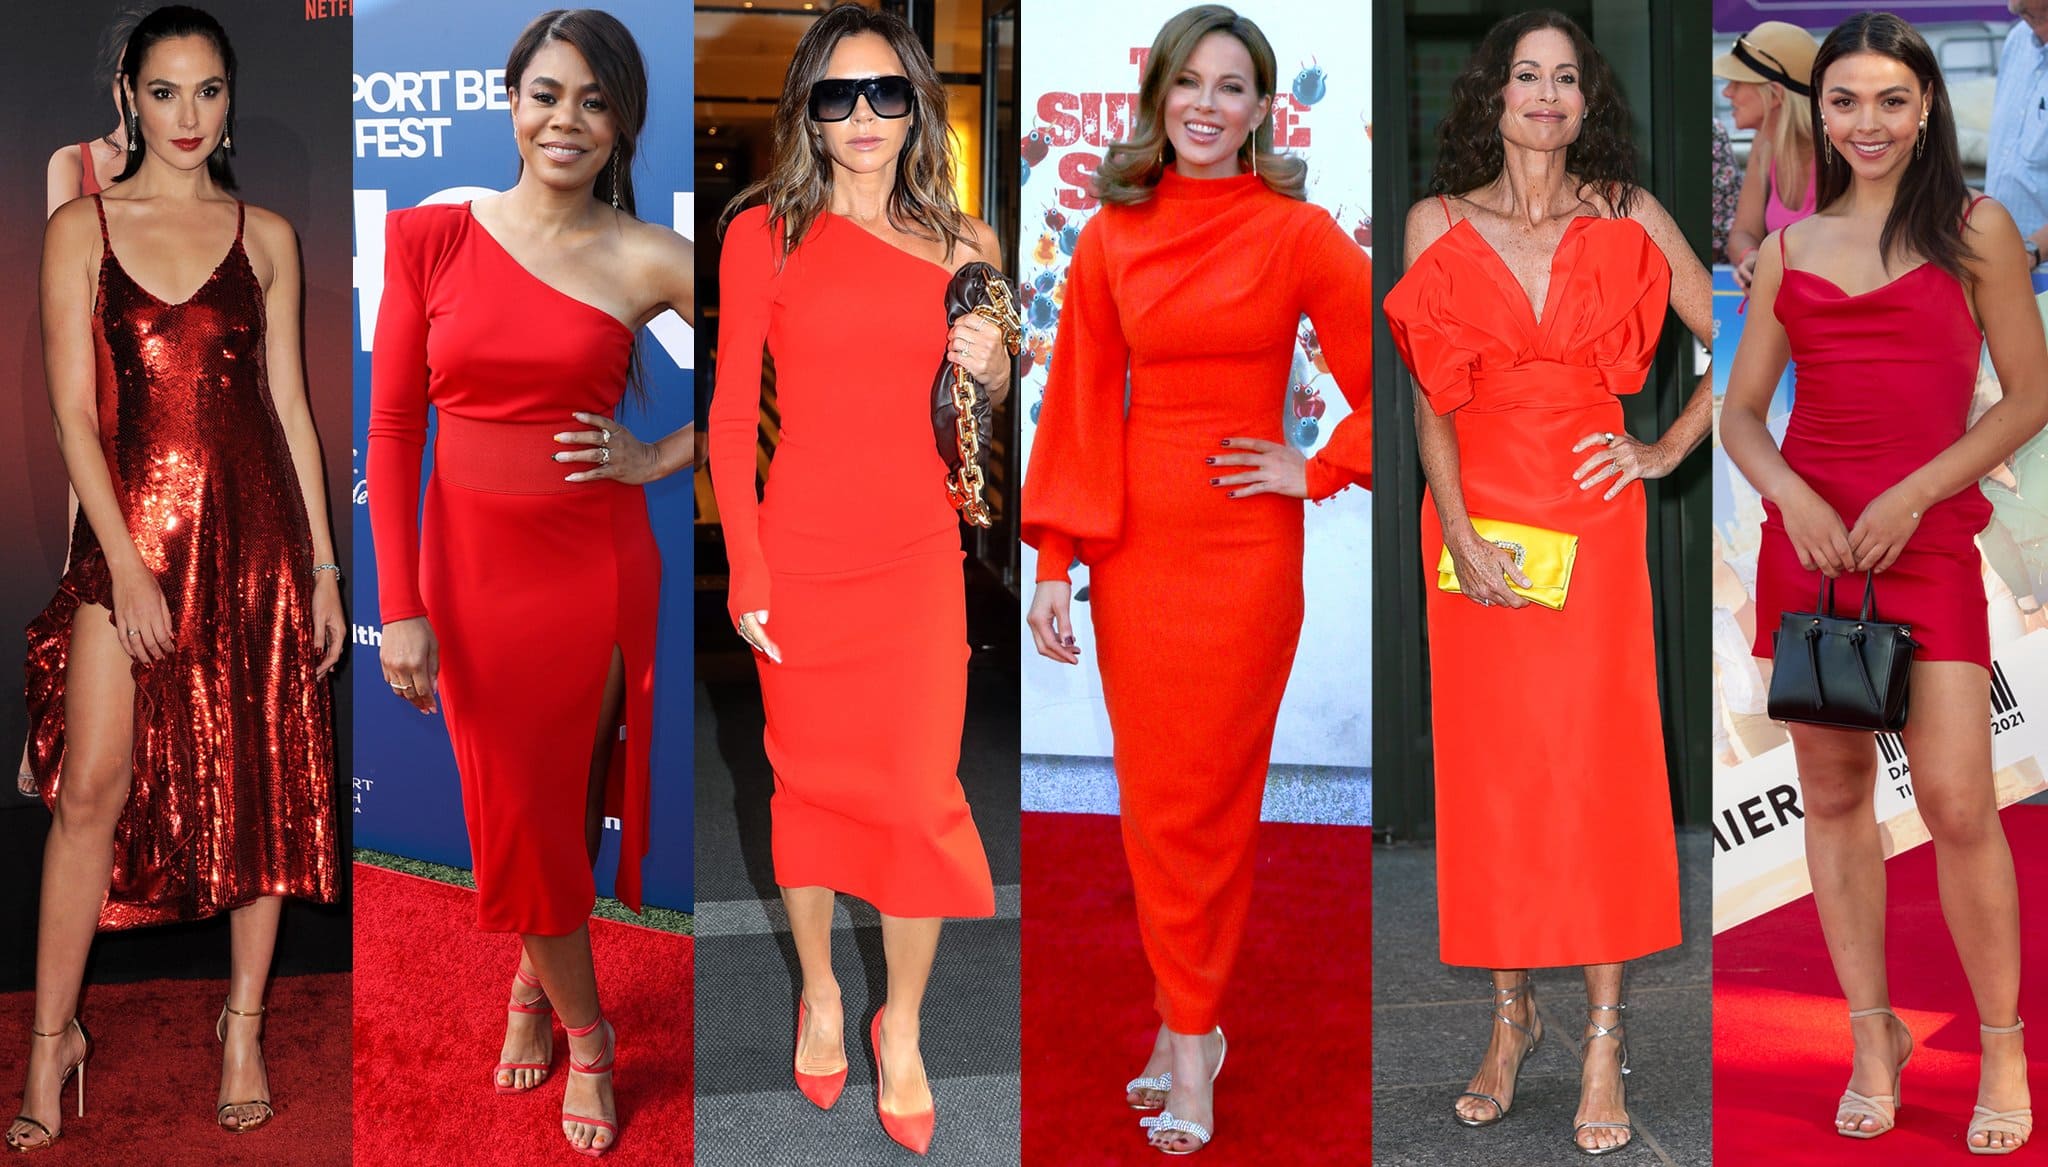 What shoe colour goes best with a red dress? - Quora